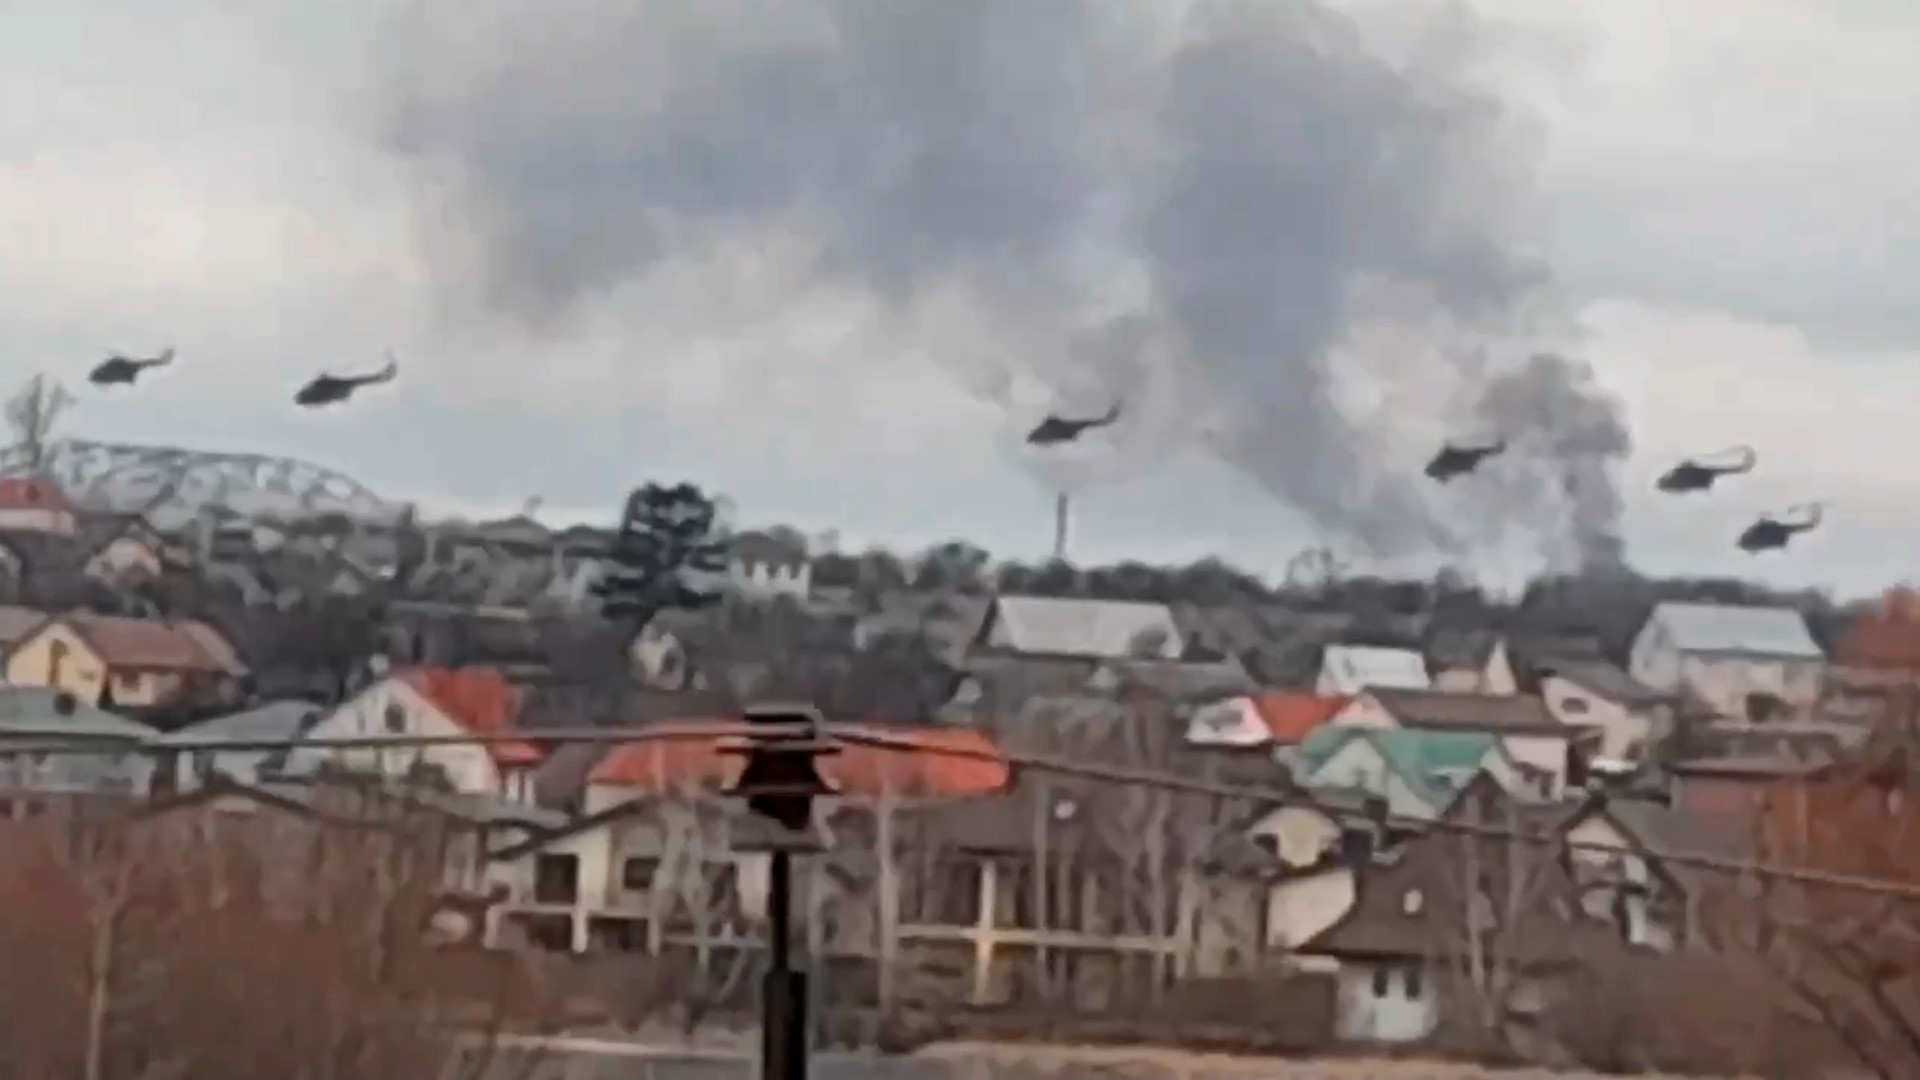 It's day two of Russia's invasion of Ukraine.